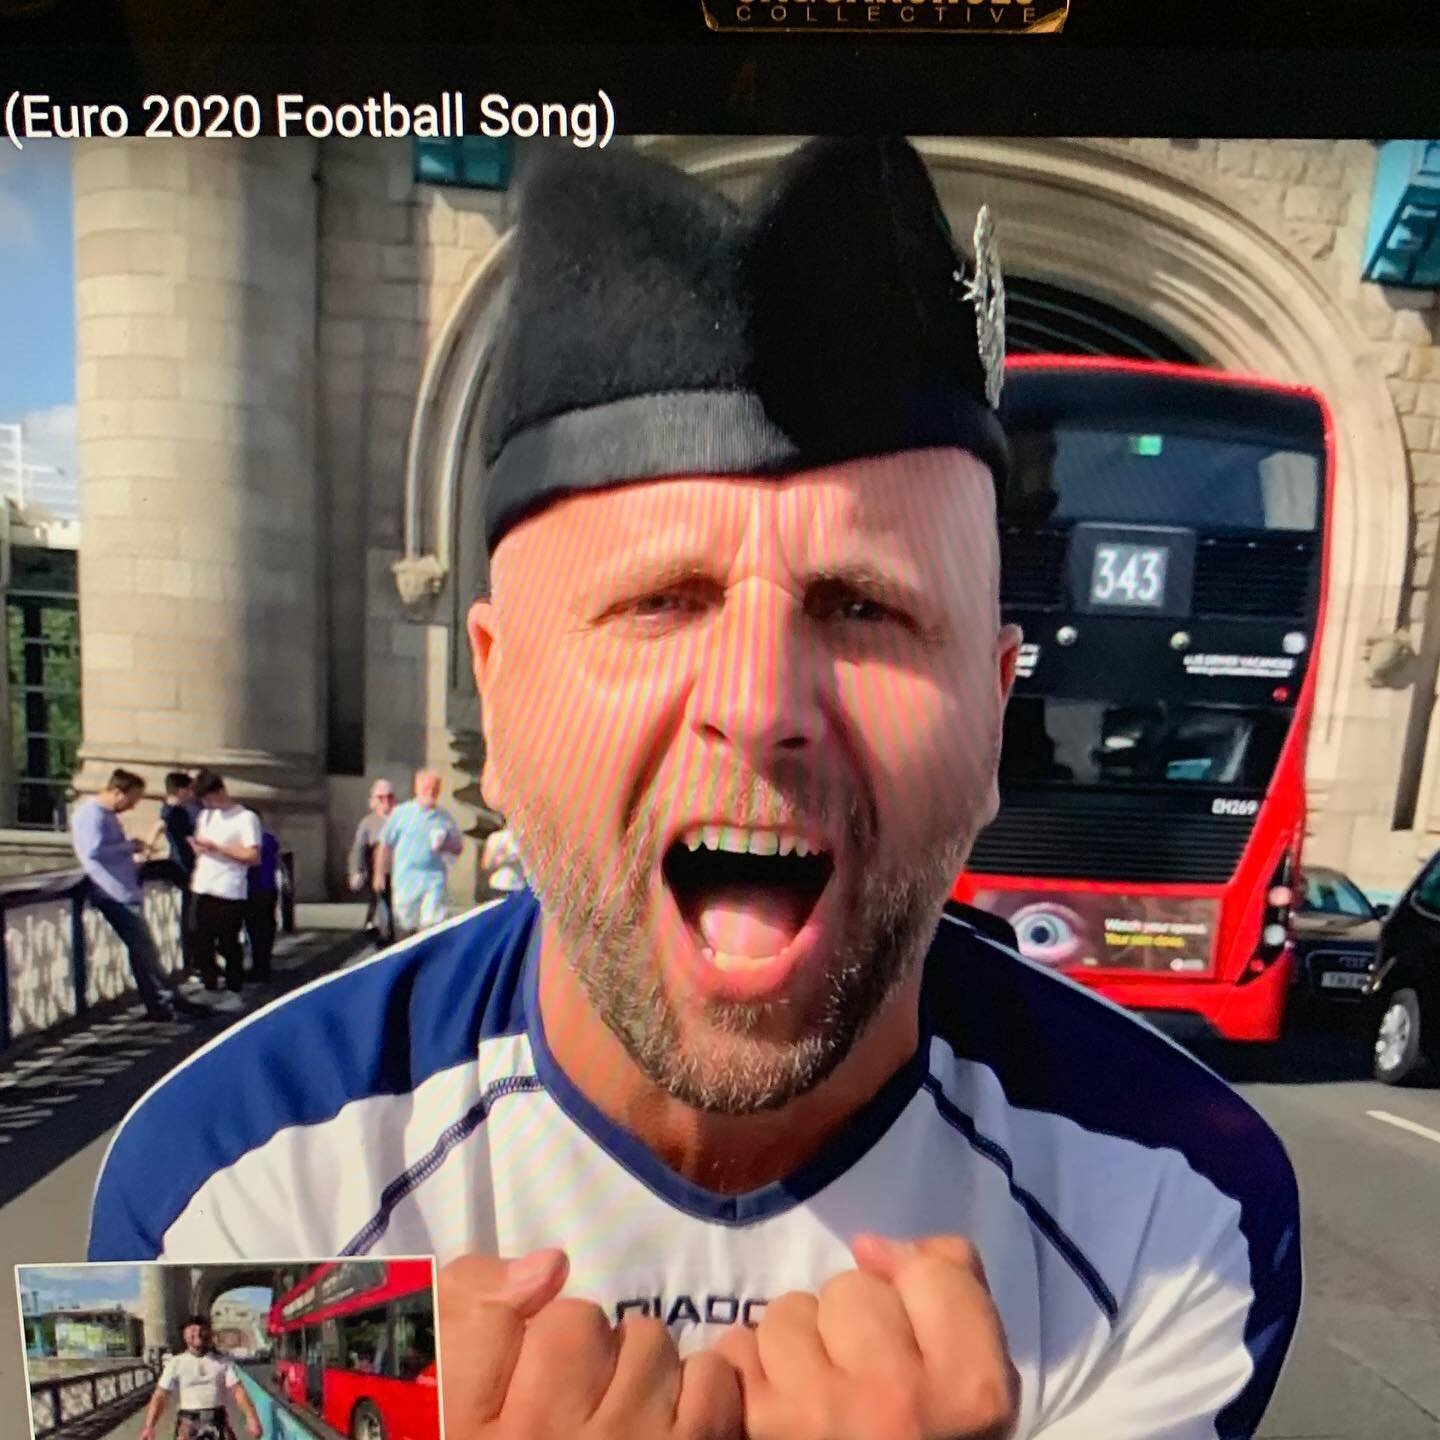 Our favourite Scotsman is back with cracking @euro.football2021 song. Share the video link, lets face it what chance have England ever got/had?? 😂 My Scotland football anthem for the Euros!  https://youtu.be/KVvvJ1KpkdA.  #piperinlondon #scotland @m